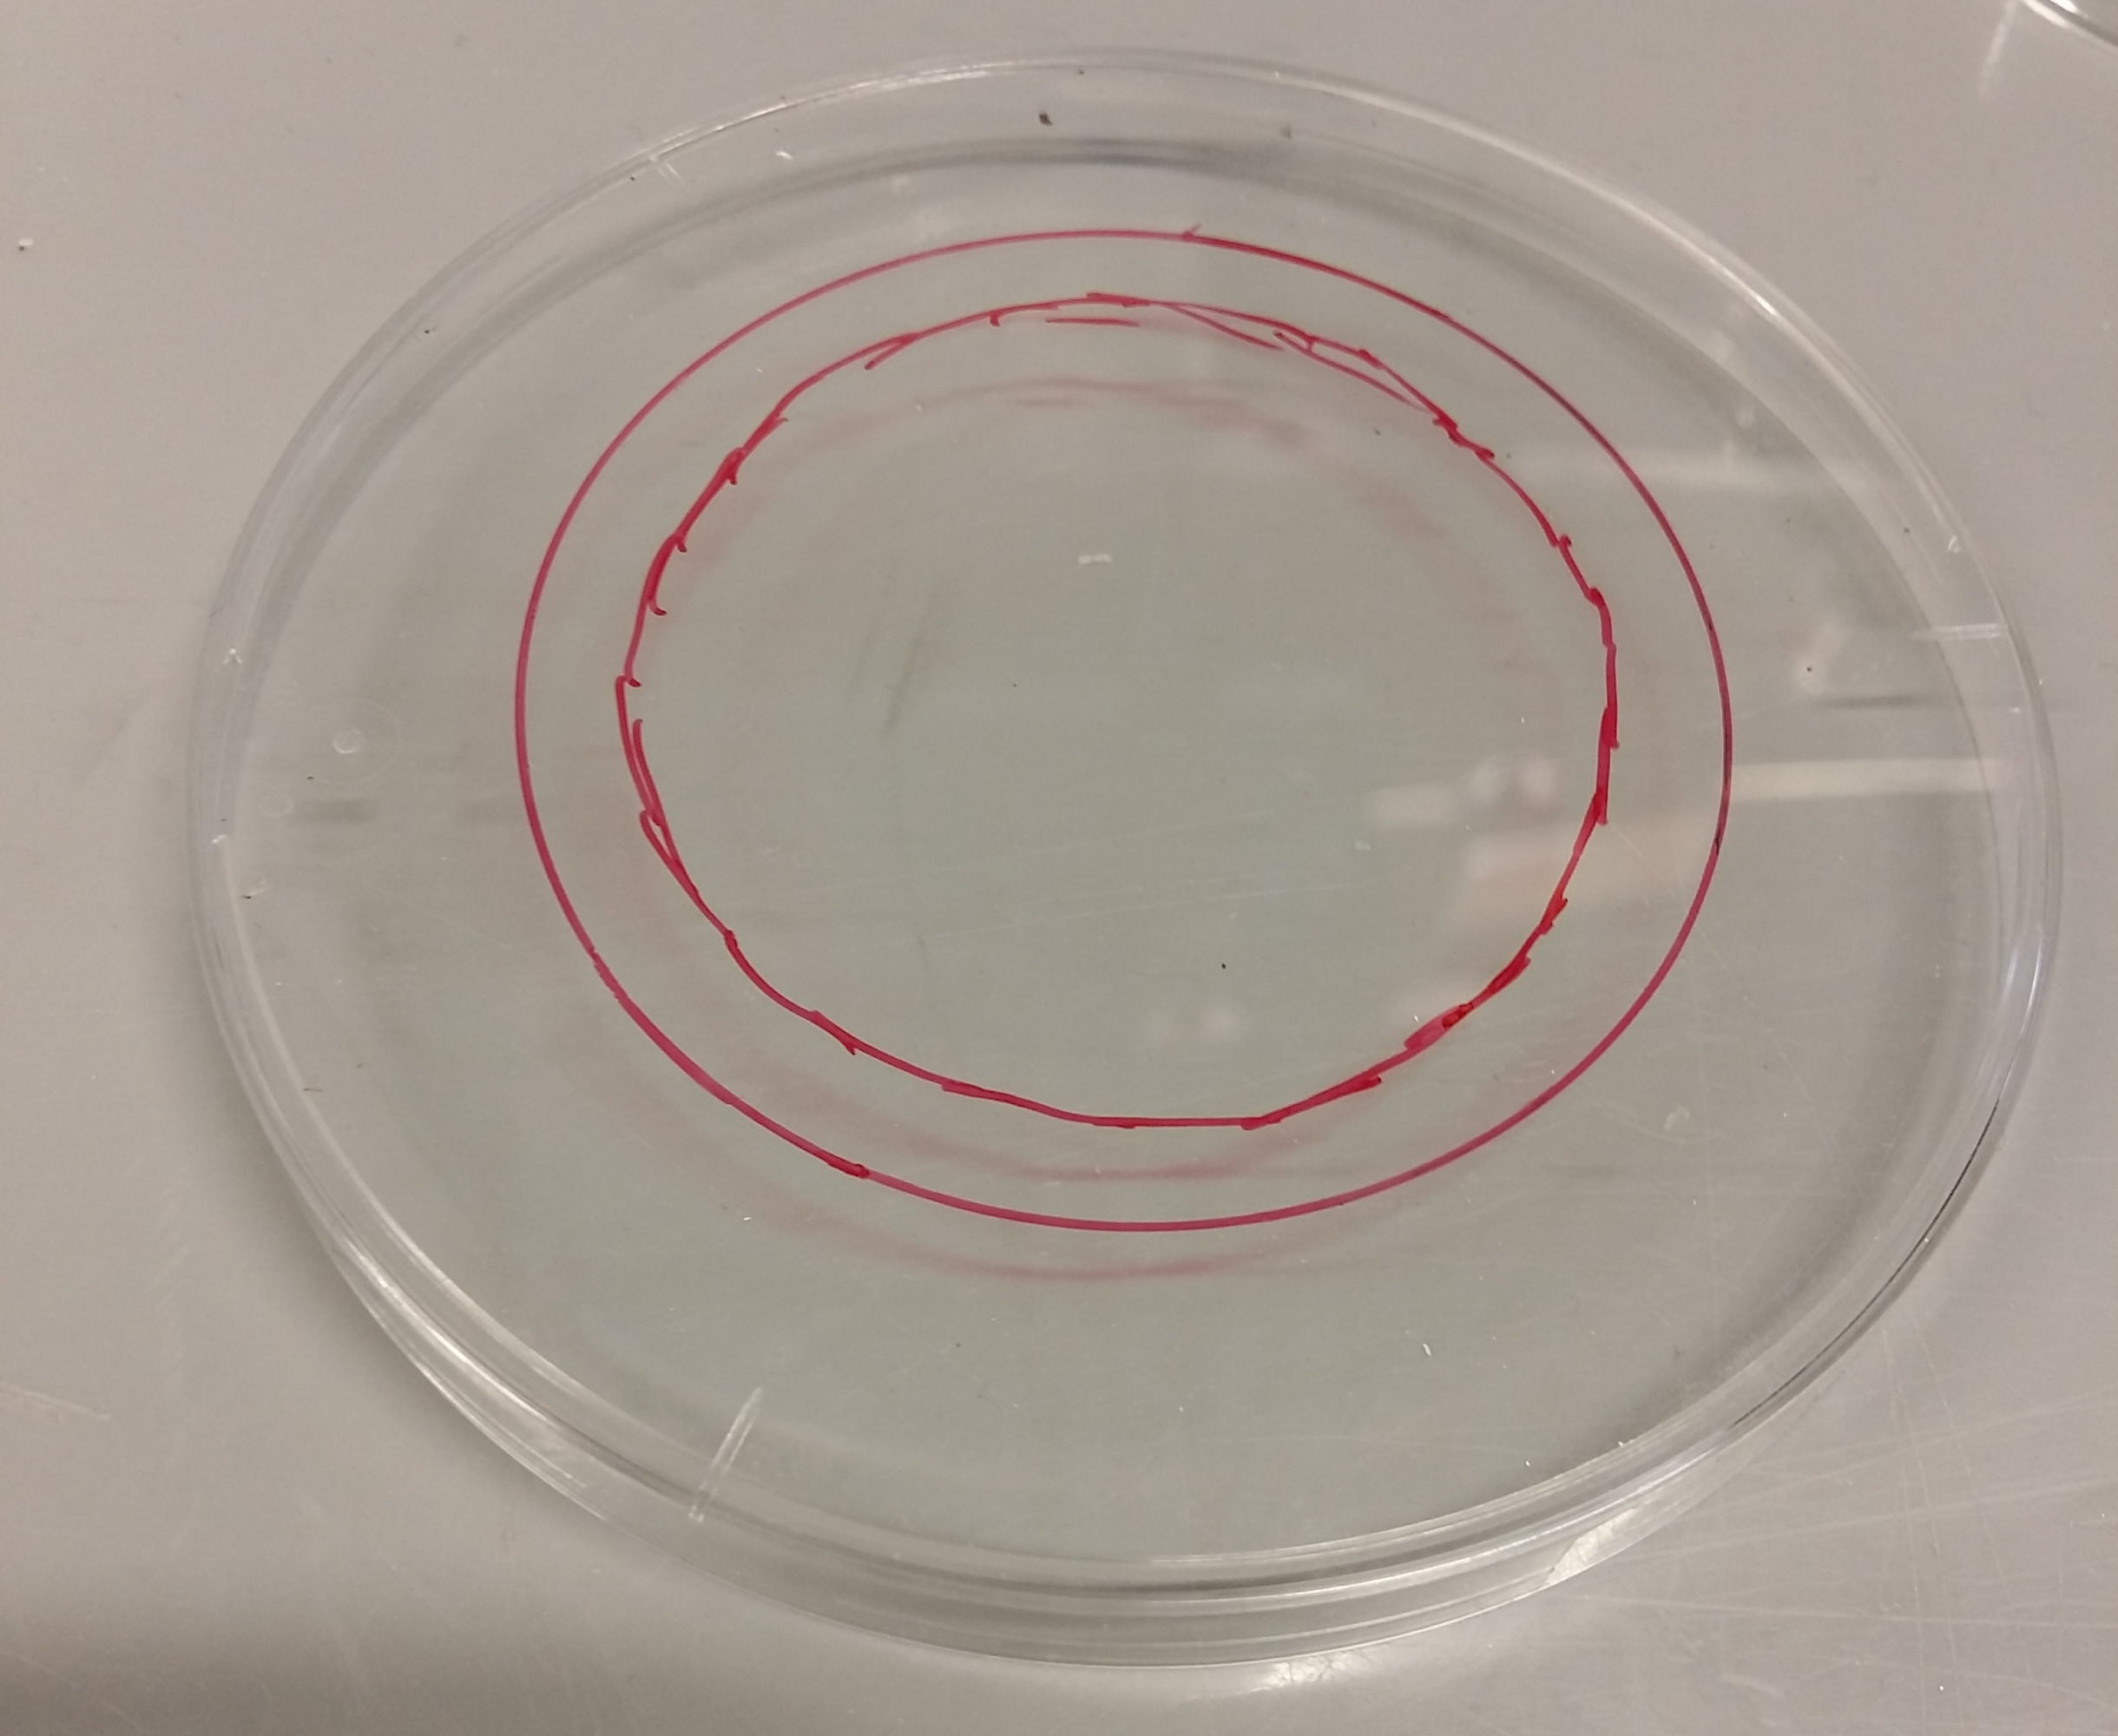 Outline for the opening in the larger petri dish.